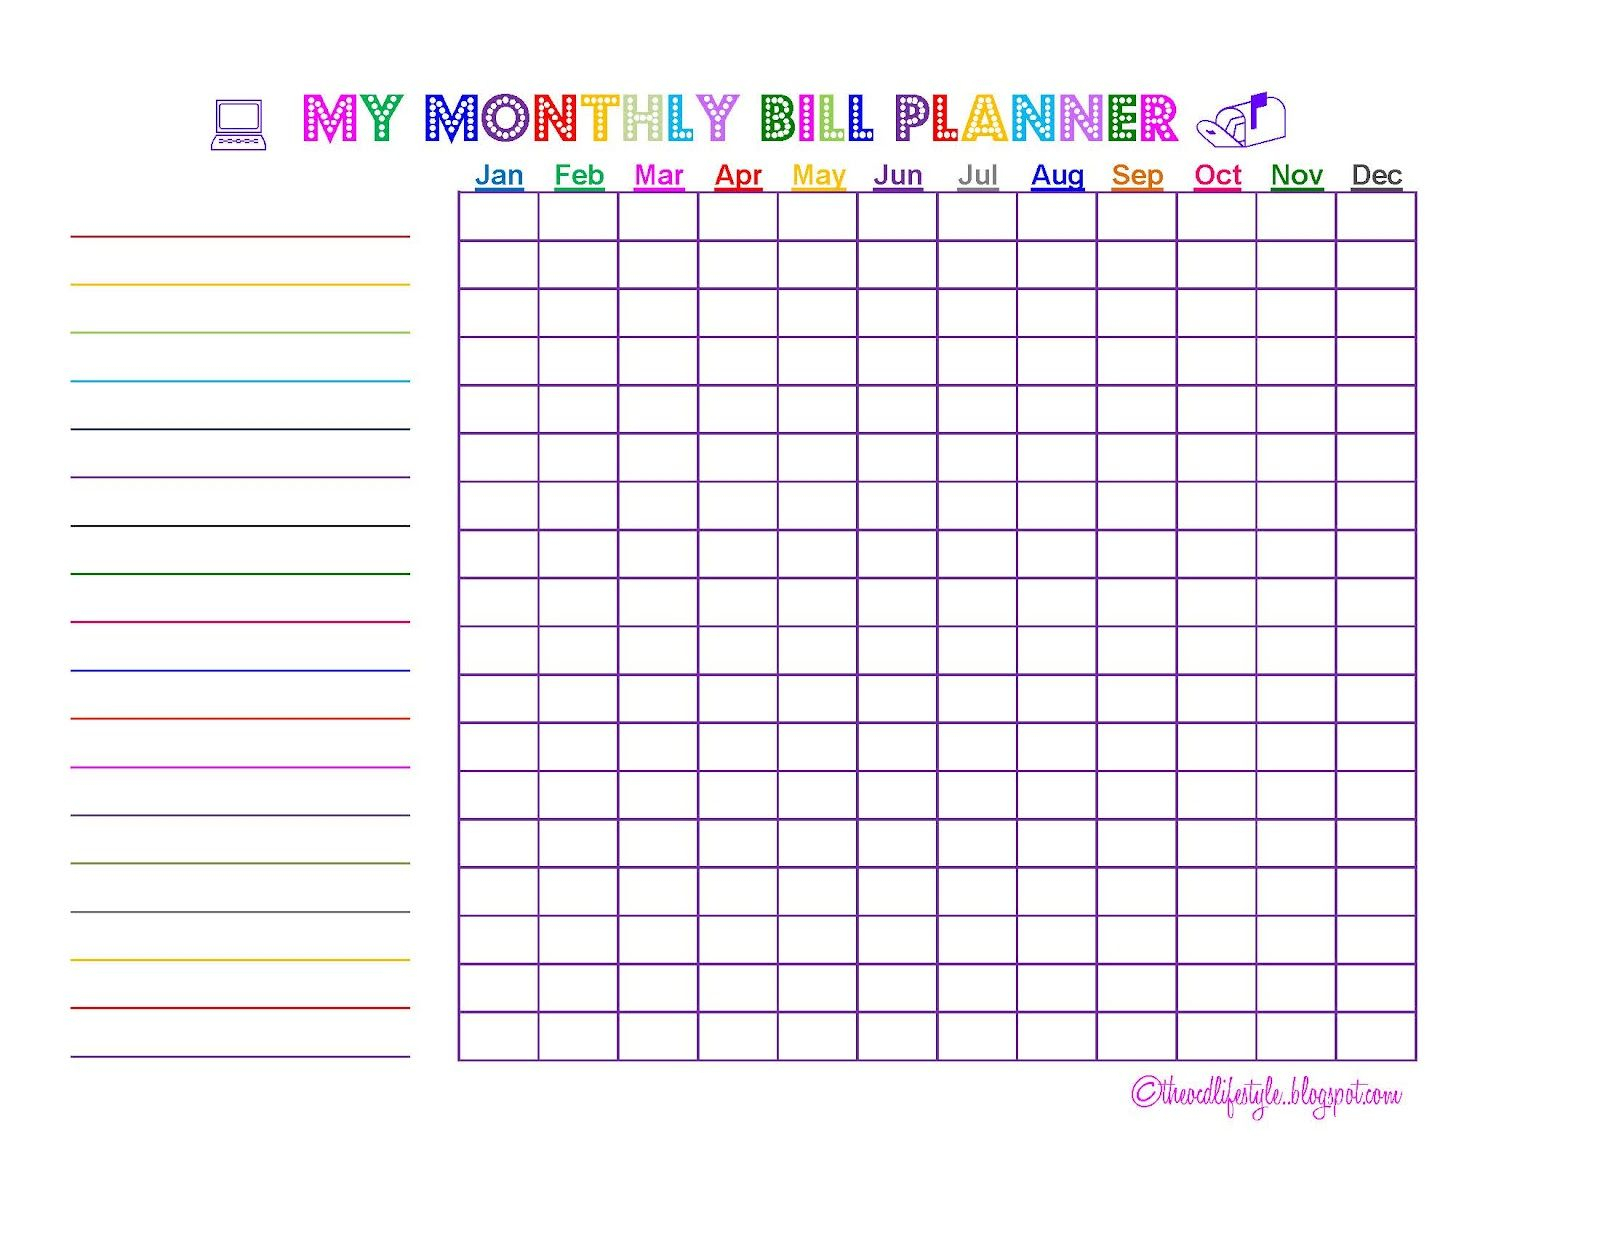 Free Monthly Bill Paying Chart Printable | Bill Planner intended for Free Printable Bill Chart